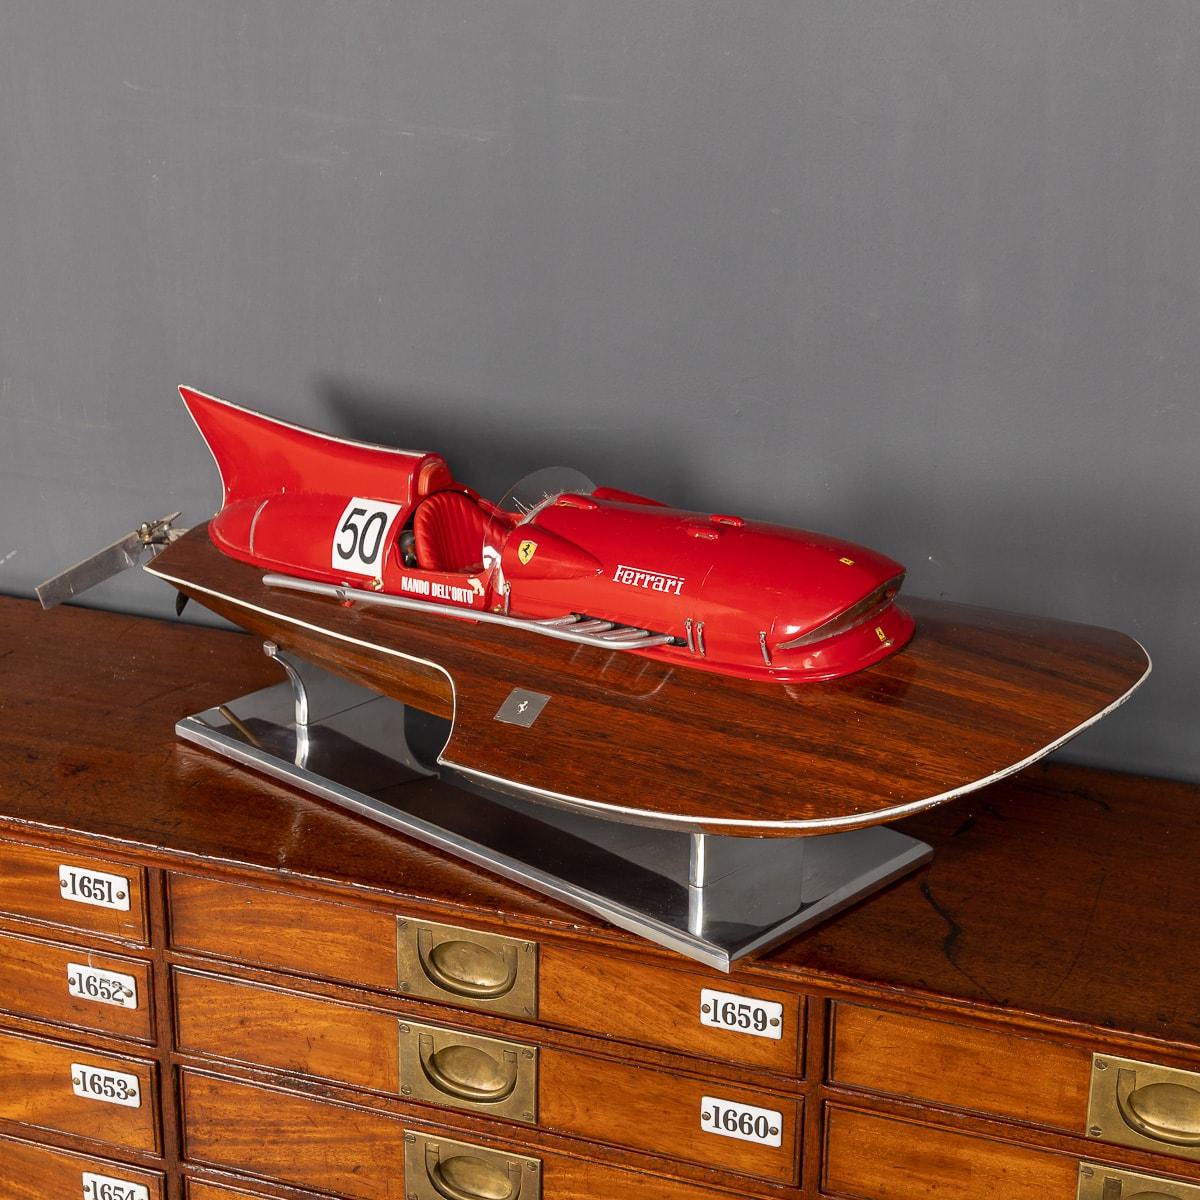 Stunning 20th Century hand-crafted scale replica of the Cantieri Timossi-built, originaly made in the 1953, this 800 kg class speed record-breaking hydroplane was piloted by Achille Castoldi.

CONDITION
In Great Condition - No Damage.

SIZE
Height: